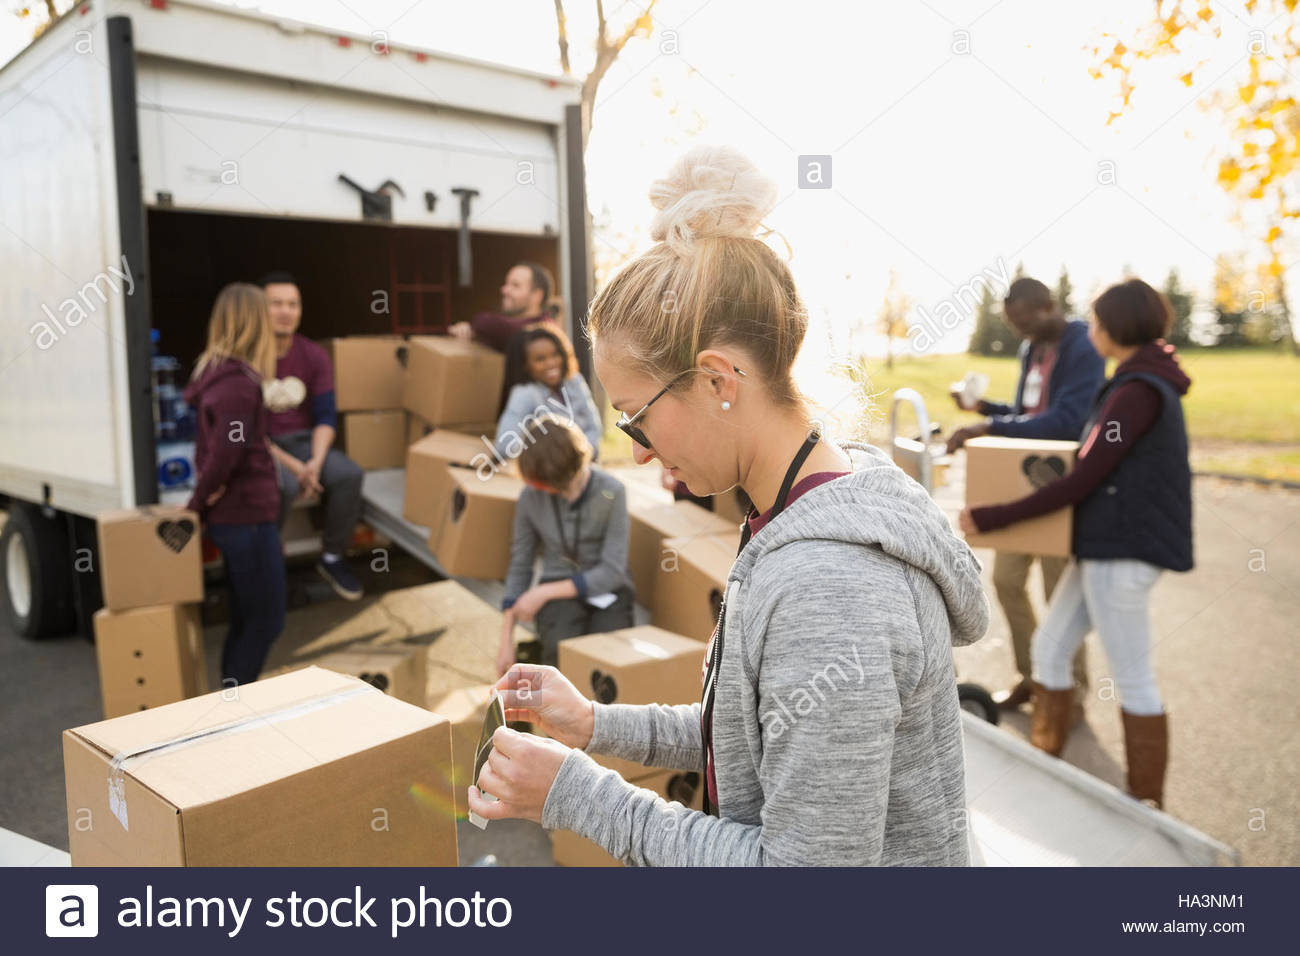 Woman volunteering unloading cardboard boxes from truck Stock Photo